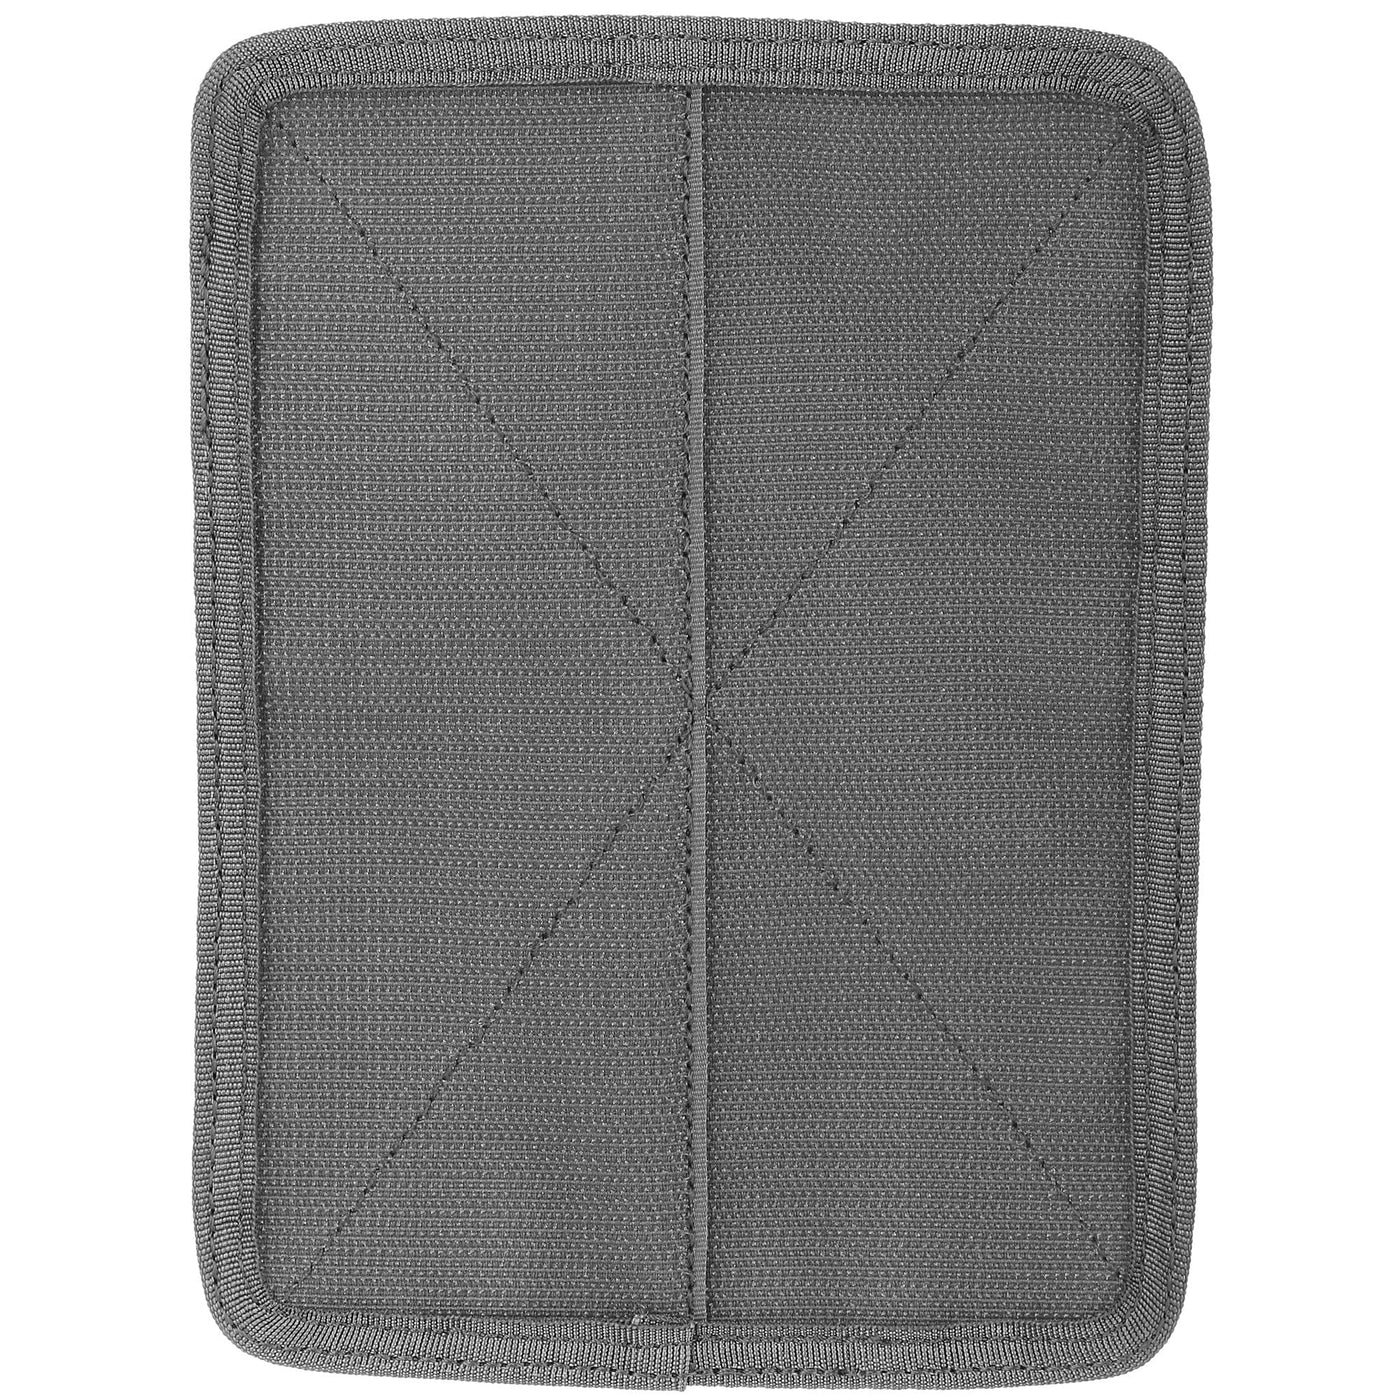 Maxpedition Maxpedition Entity H&l Lp Panel Gray Holsters